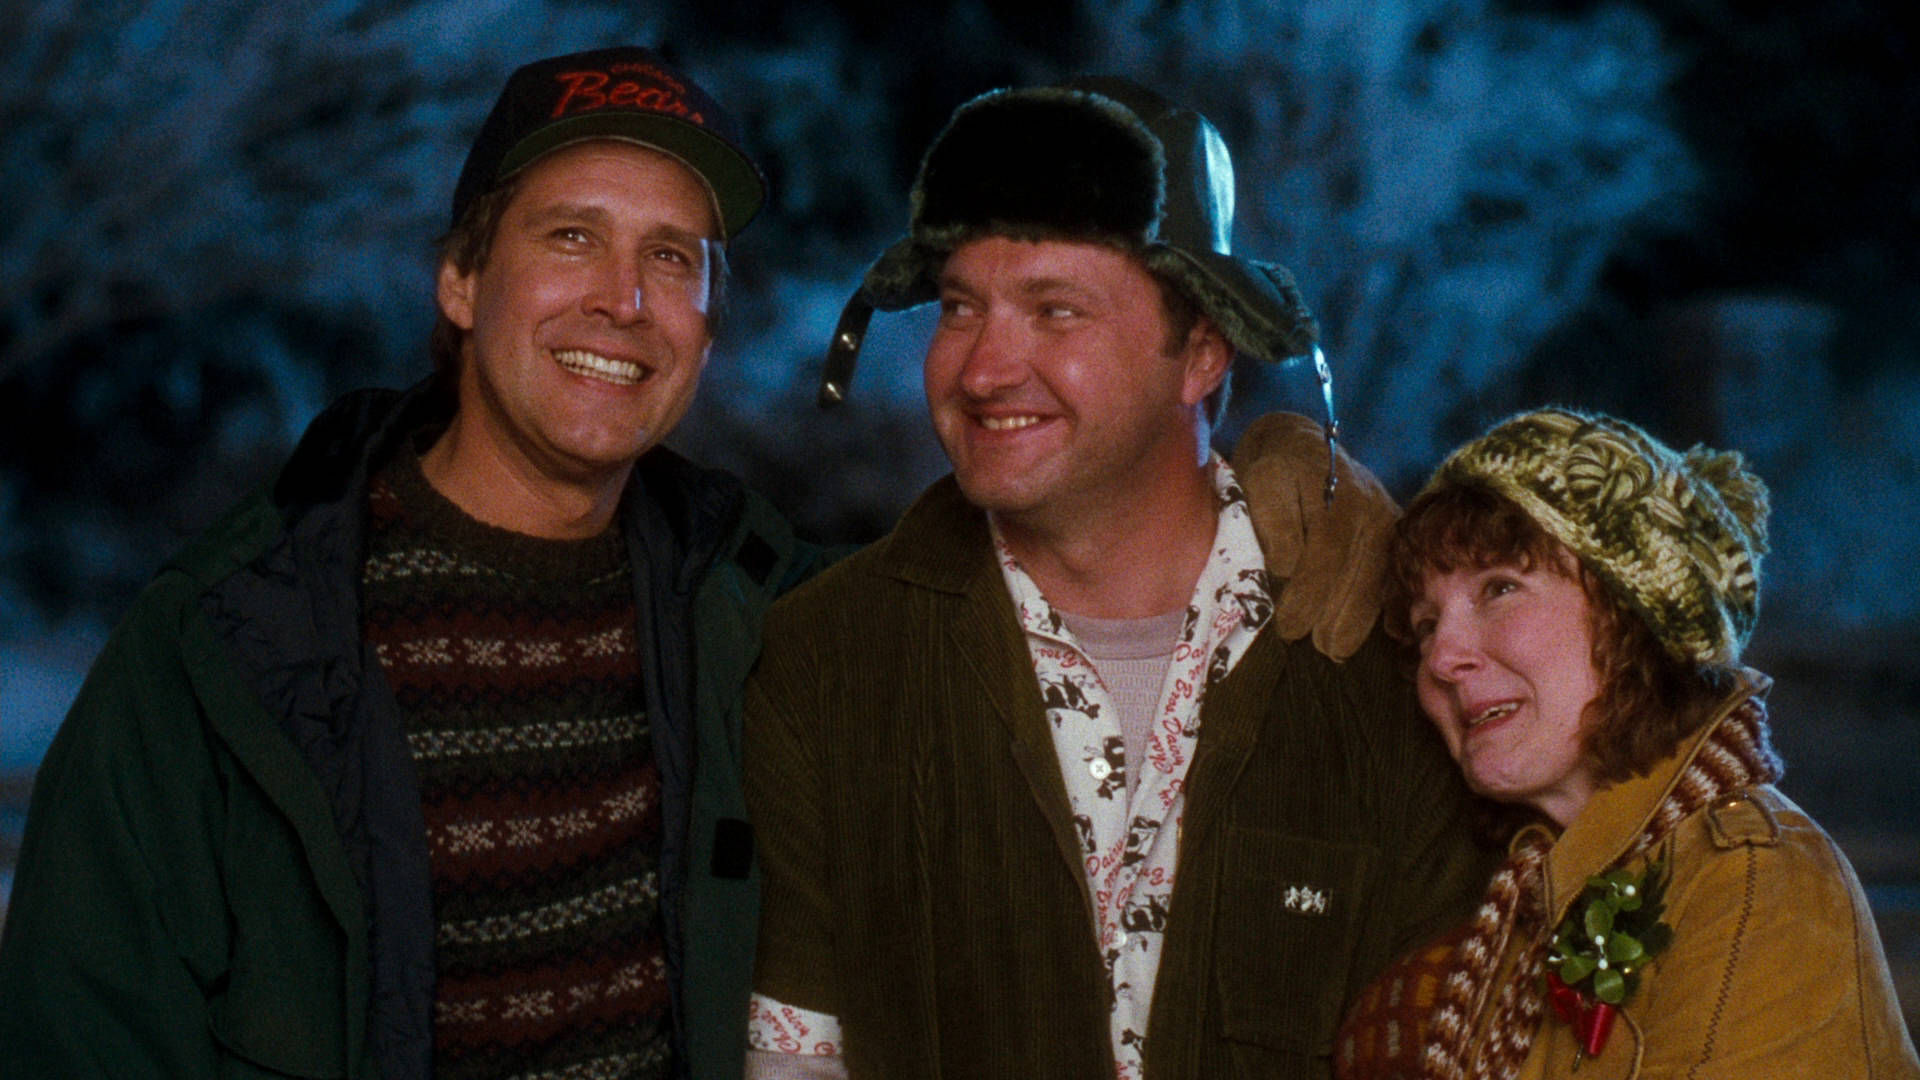 Celebrating the Holidays with Family in Christmas Vacation Wallpaper